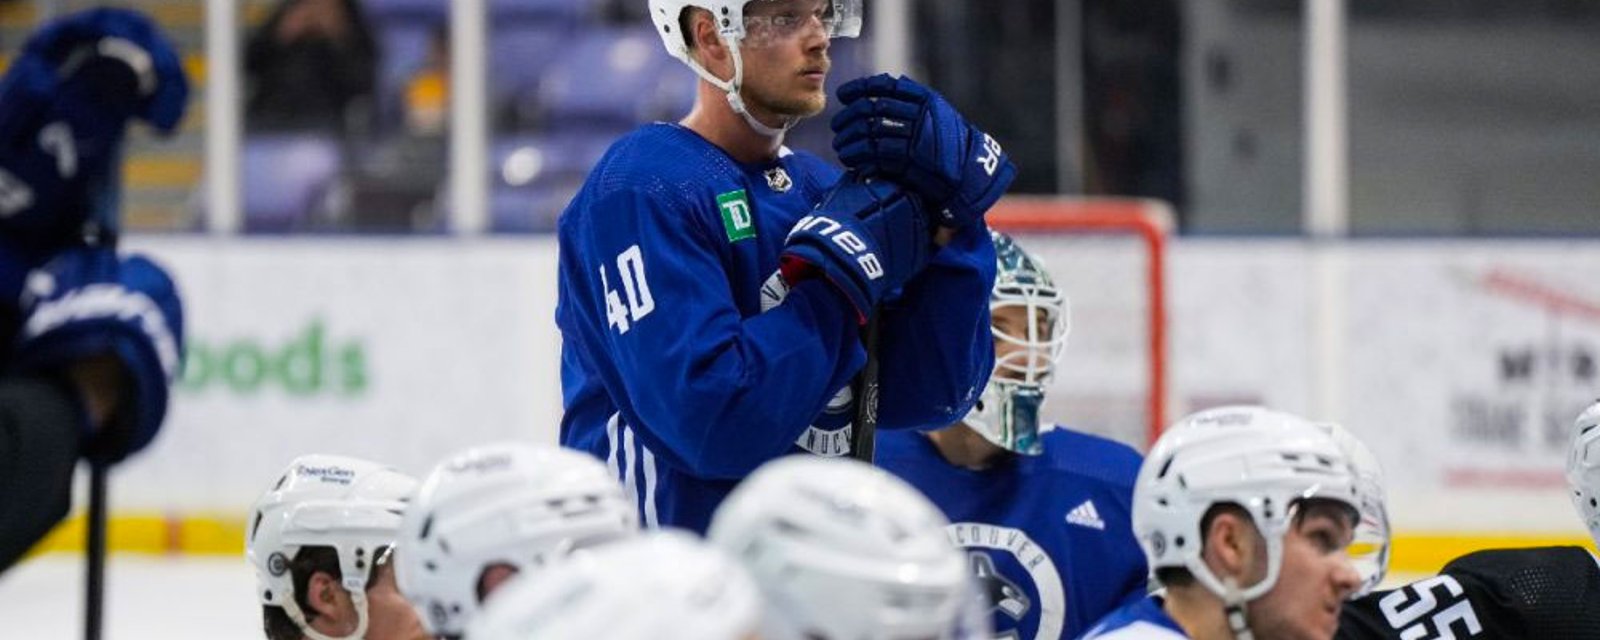 Major update on Elias Pettersson's contract situation in Vancouver from Frank Seravalli